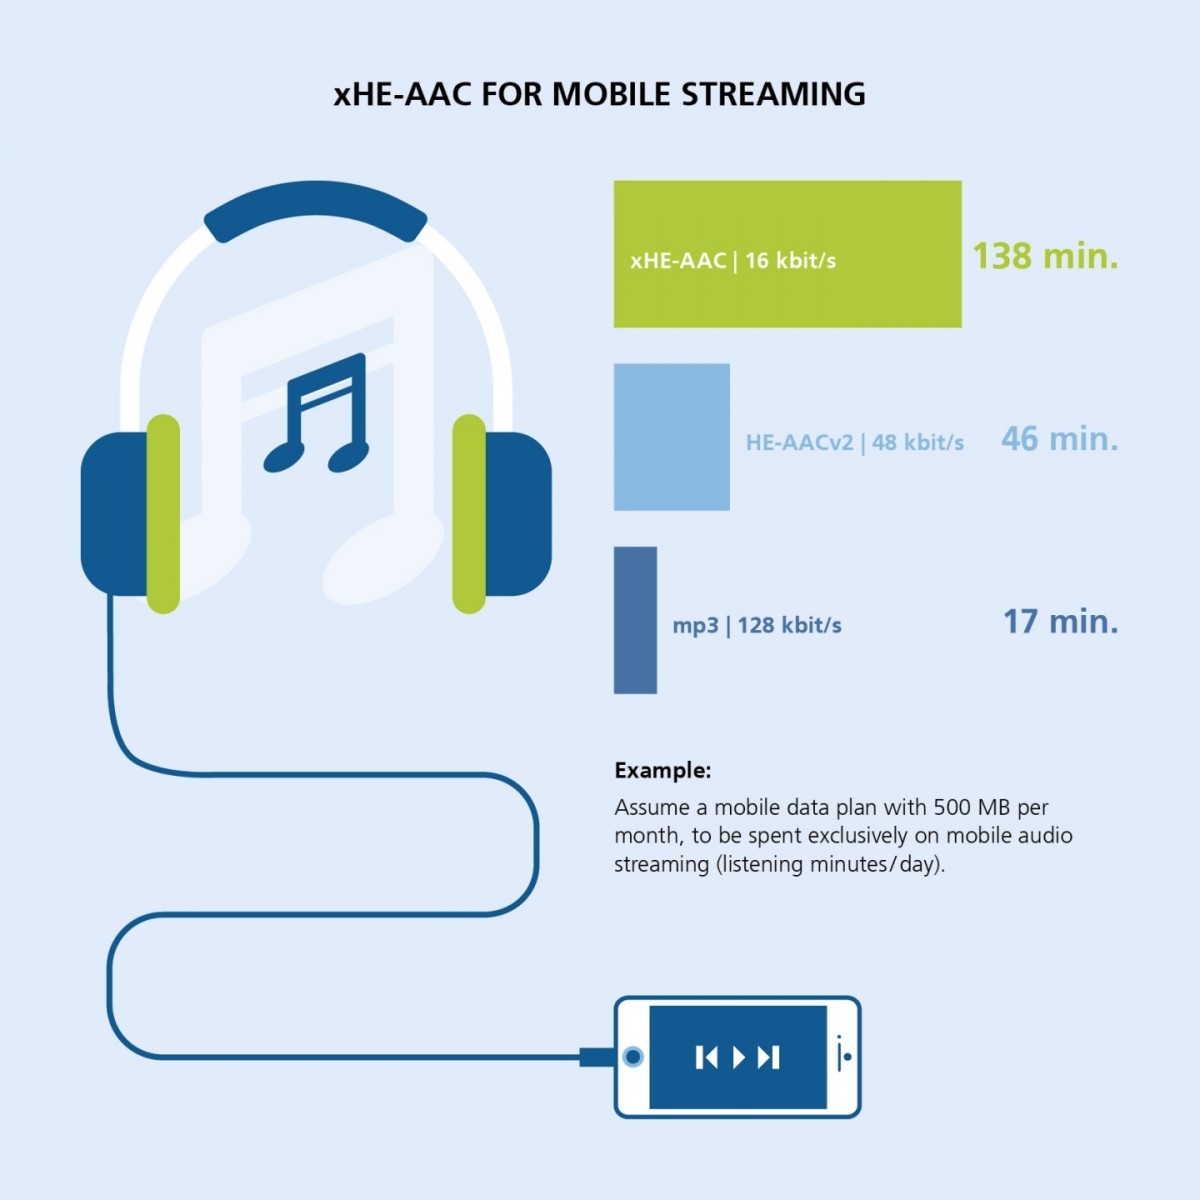 Netflix adopts xHE-AAC variable bitrate audio codec on Android